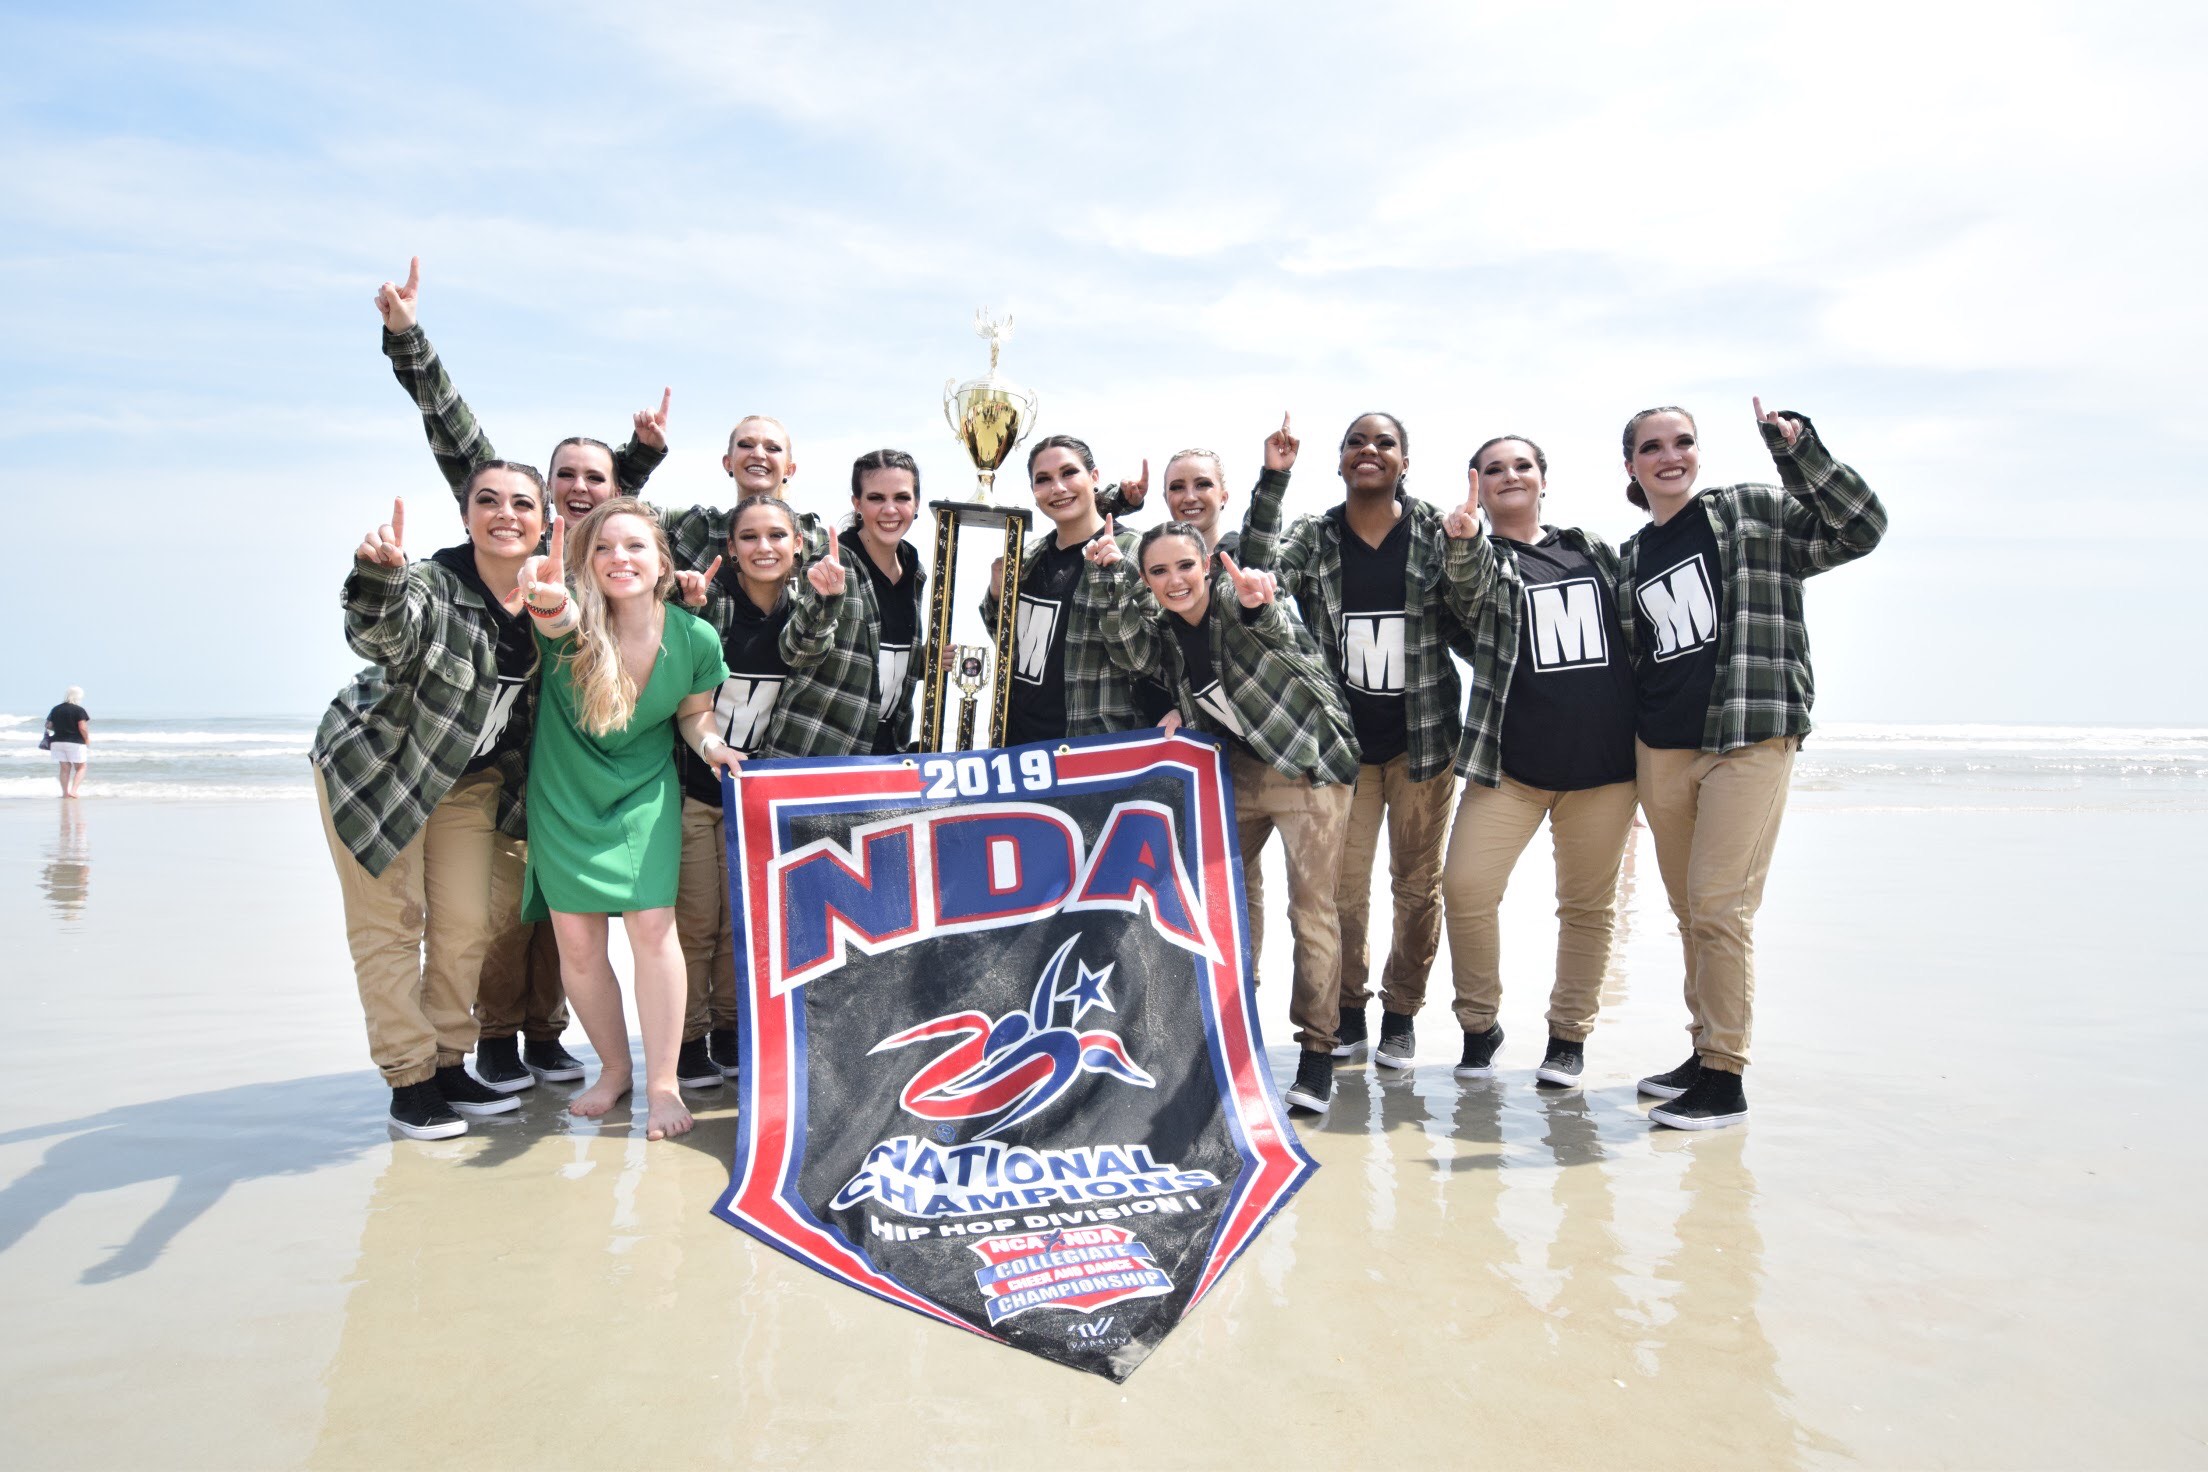 Jasper dancers posing with 2019 National Championship banner on beach